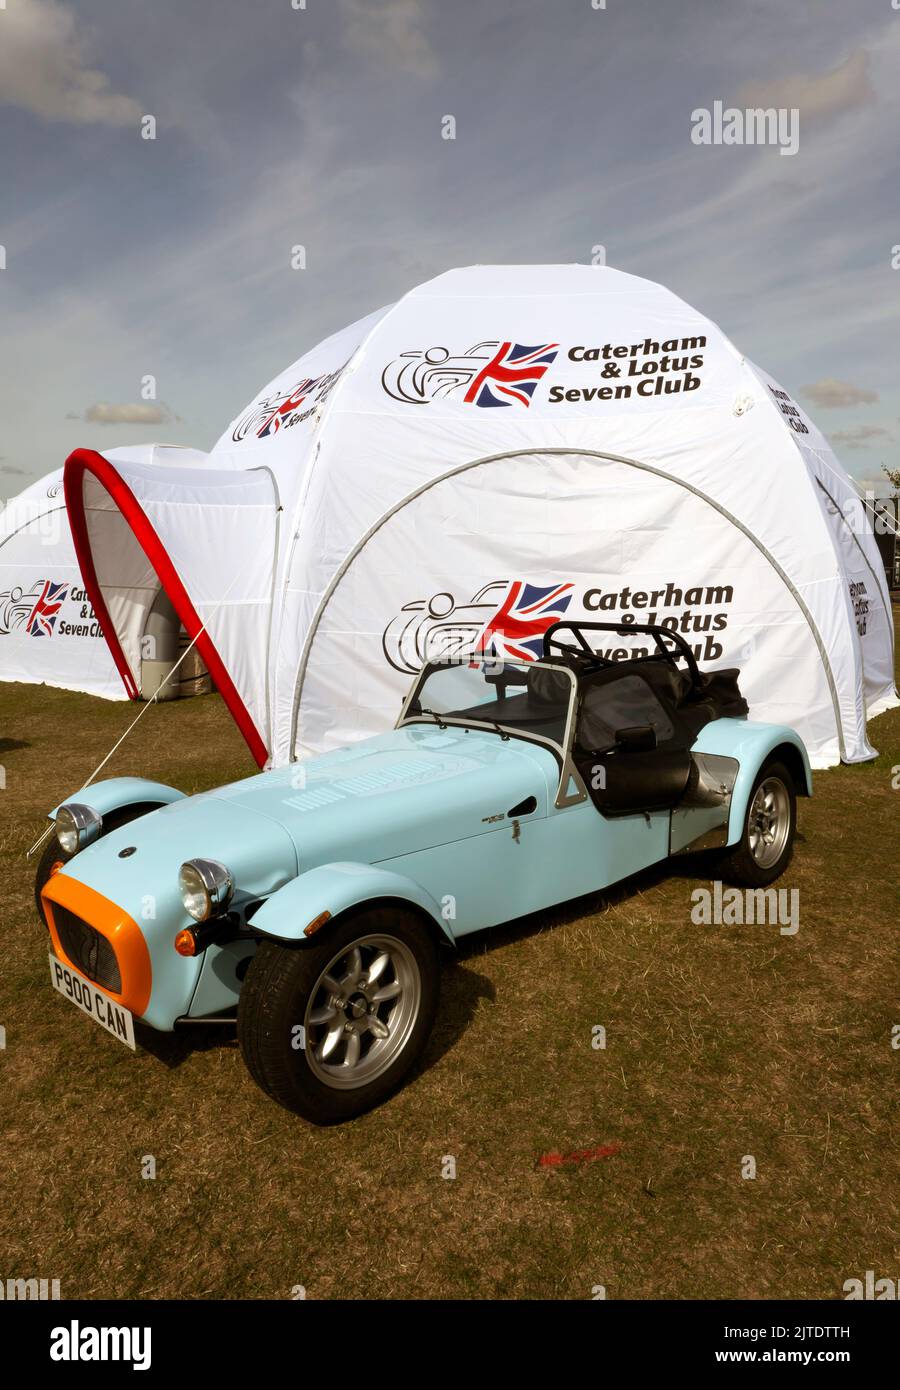 Three-quarters front view of a Blue, 2017,  Caterham 7, 270 S, in front of the Caterham and Lotus Seven Club Tent, at the 2022 Silverstone Classic Stock Photo